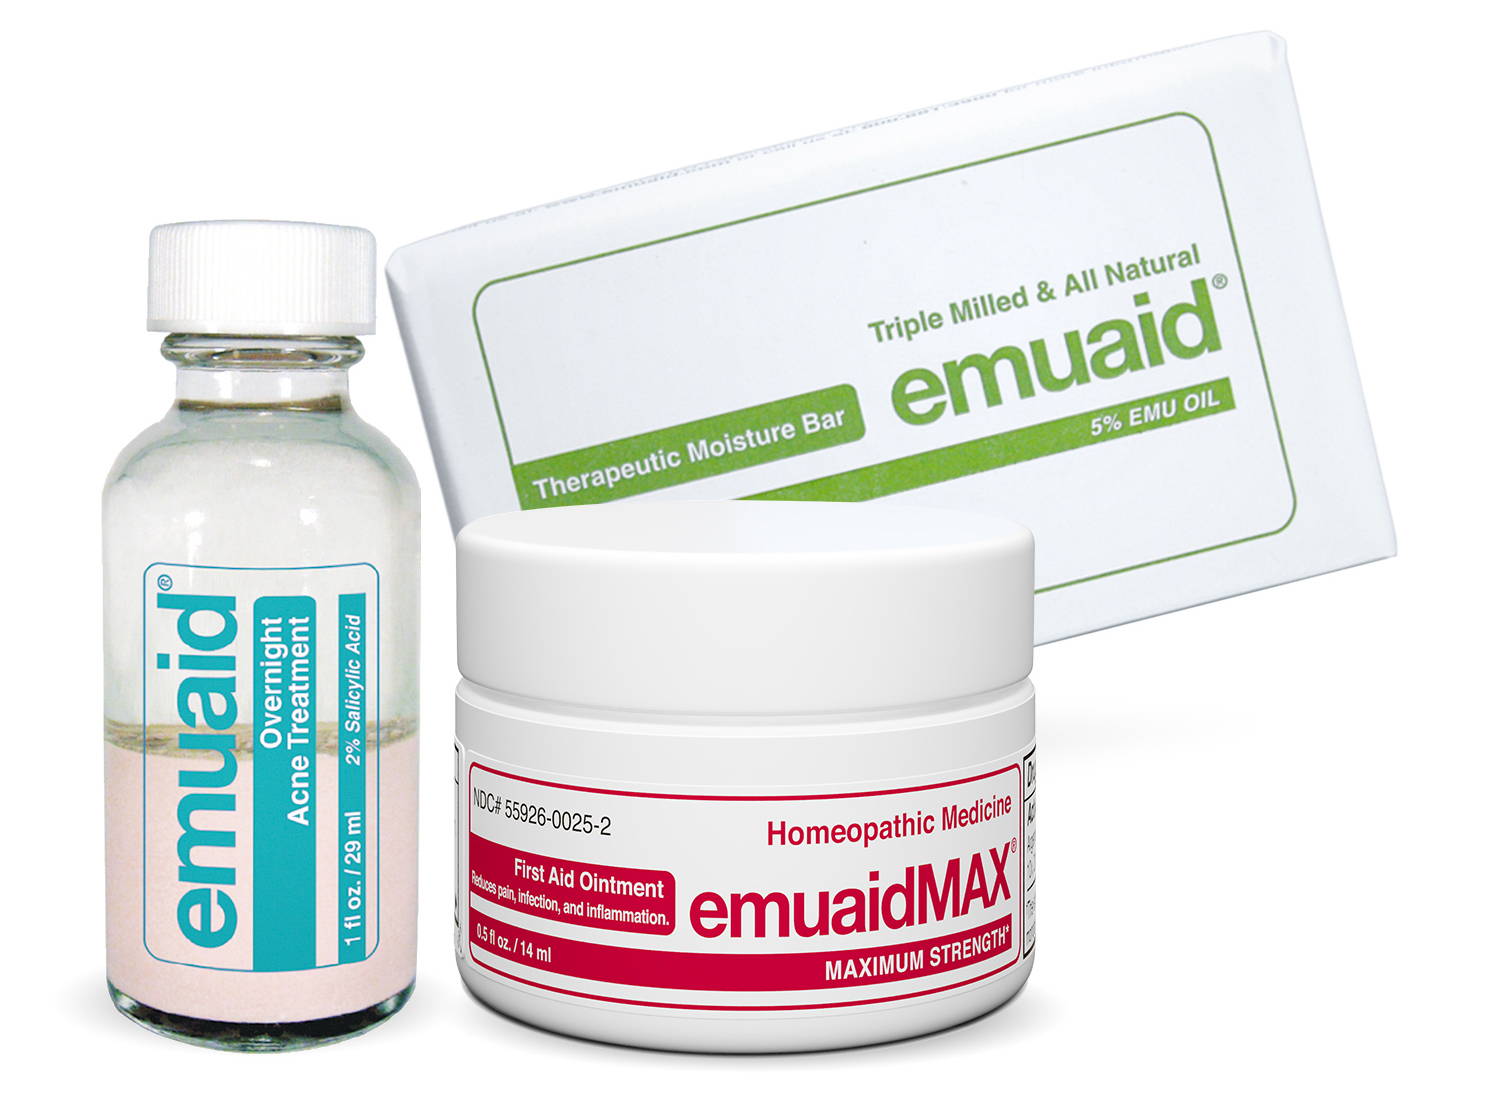 This is a picture of the EMUAIDⓇ Overnight Acne Treatment., EMUAIDⓇ Therapeutic Moisture Bar, and EMUAIDMAX® First Aid Ointment.